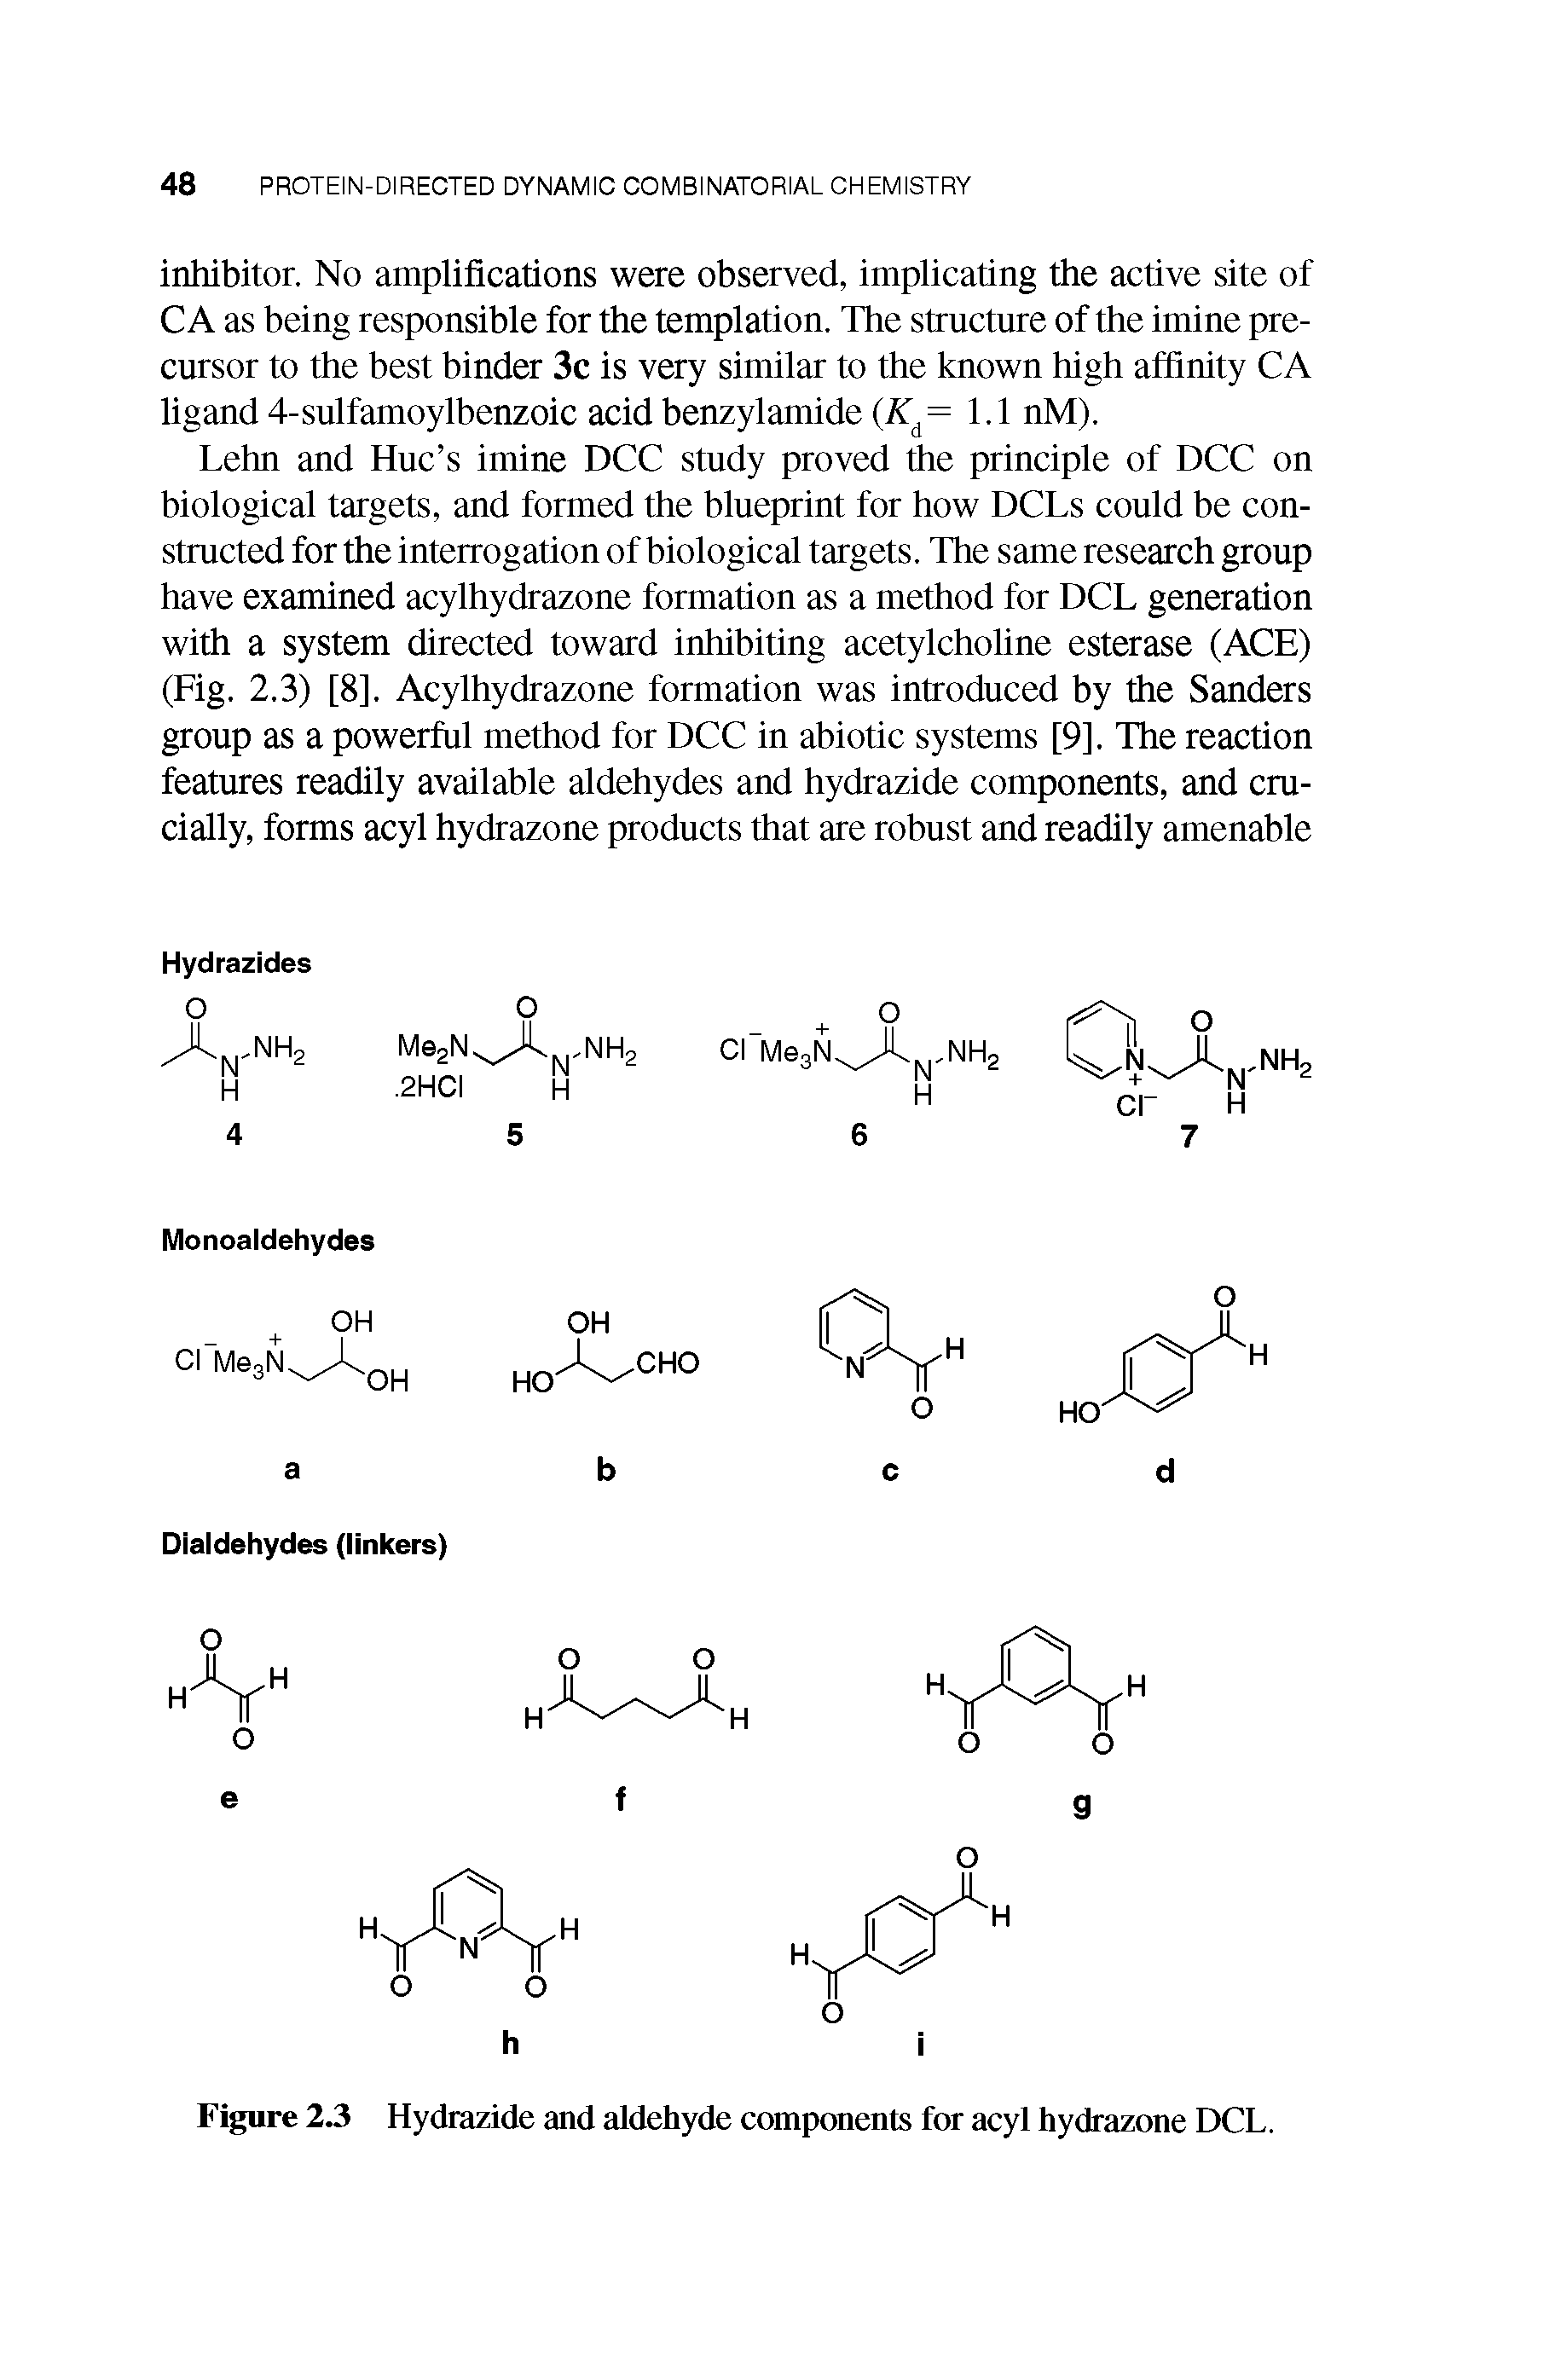 Figure 2.3 Hydrazide and aldehyde components for acyl hydrazone DCL.